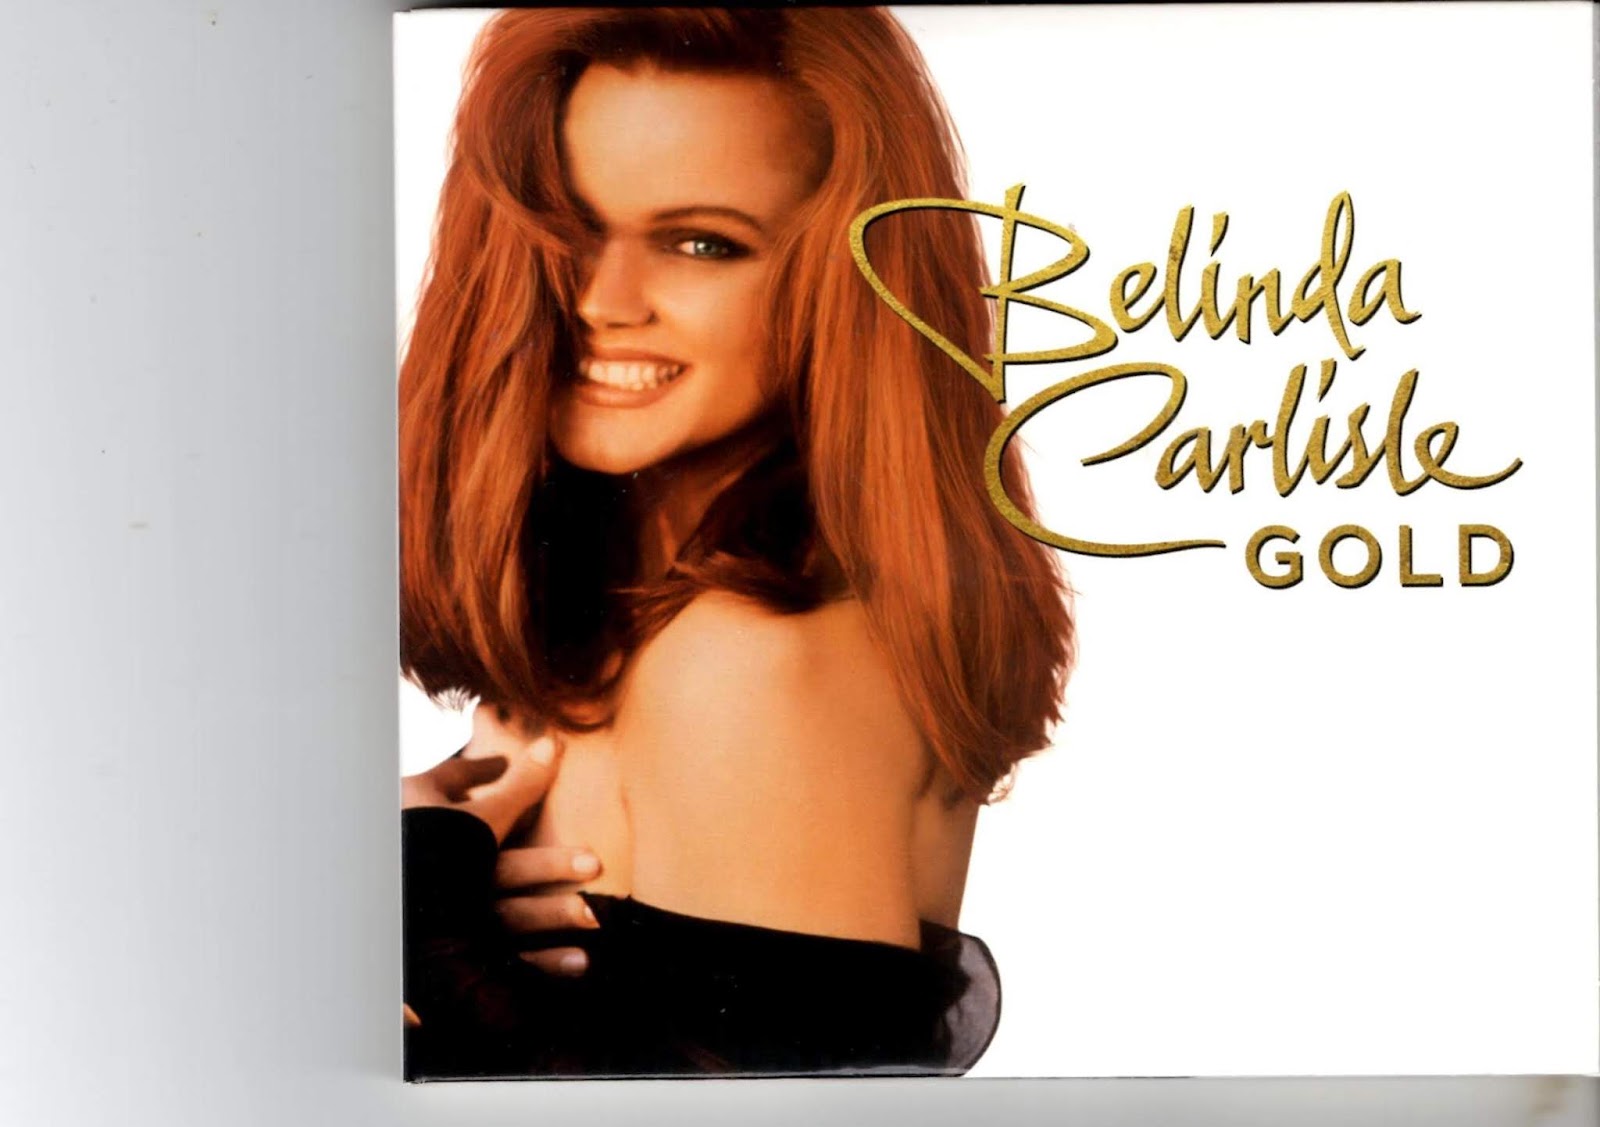 This is the new 3 CD set compilation by legendary American singer Belinda C...